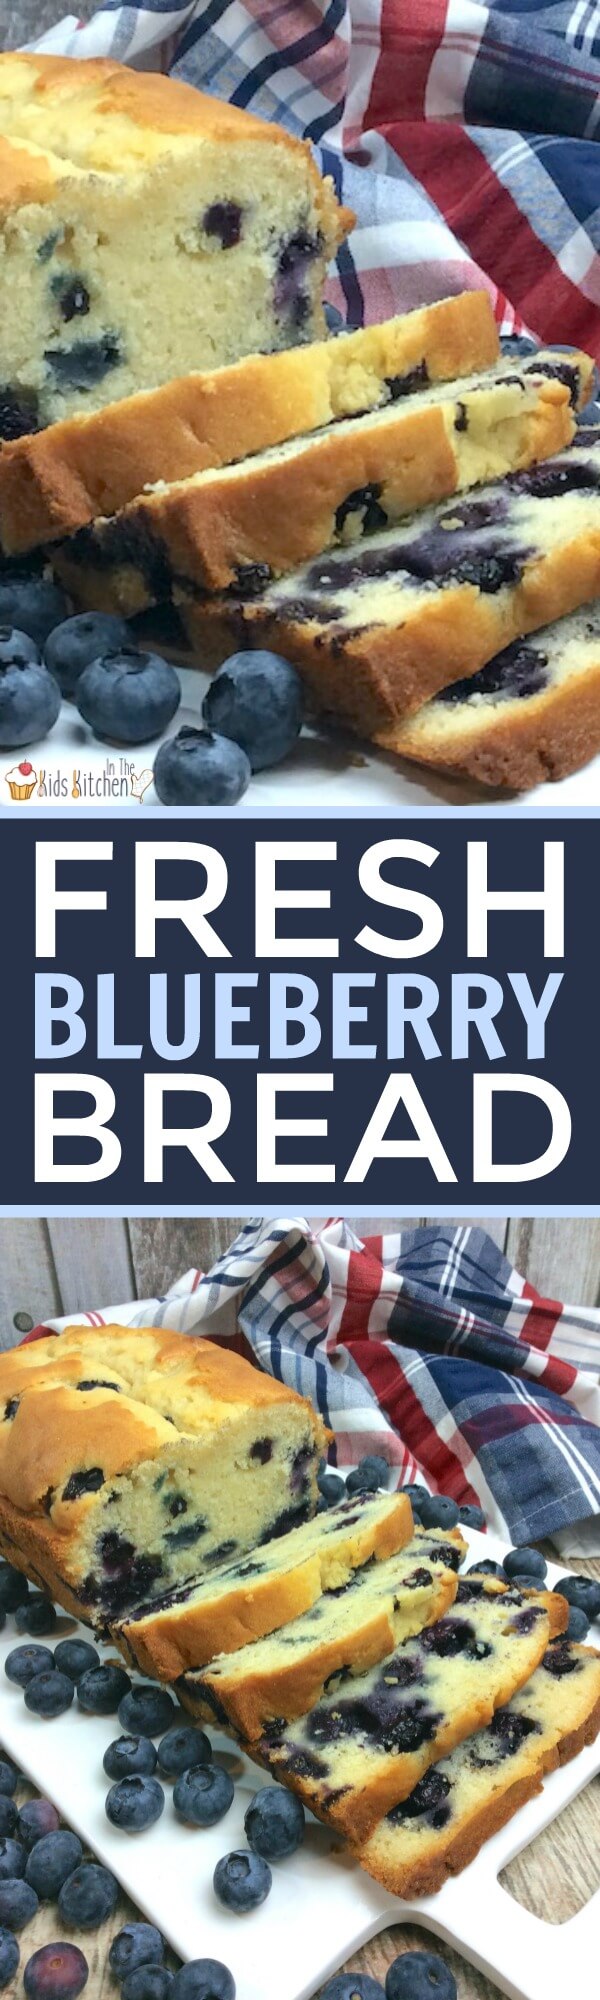 Forget muffins!! Take advantage of the summer growing season with this amazing blueberry loaf! Perfect for breakfast, dessert, or anytime!